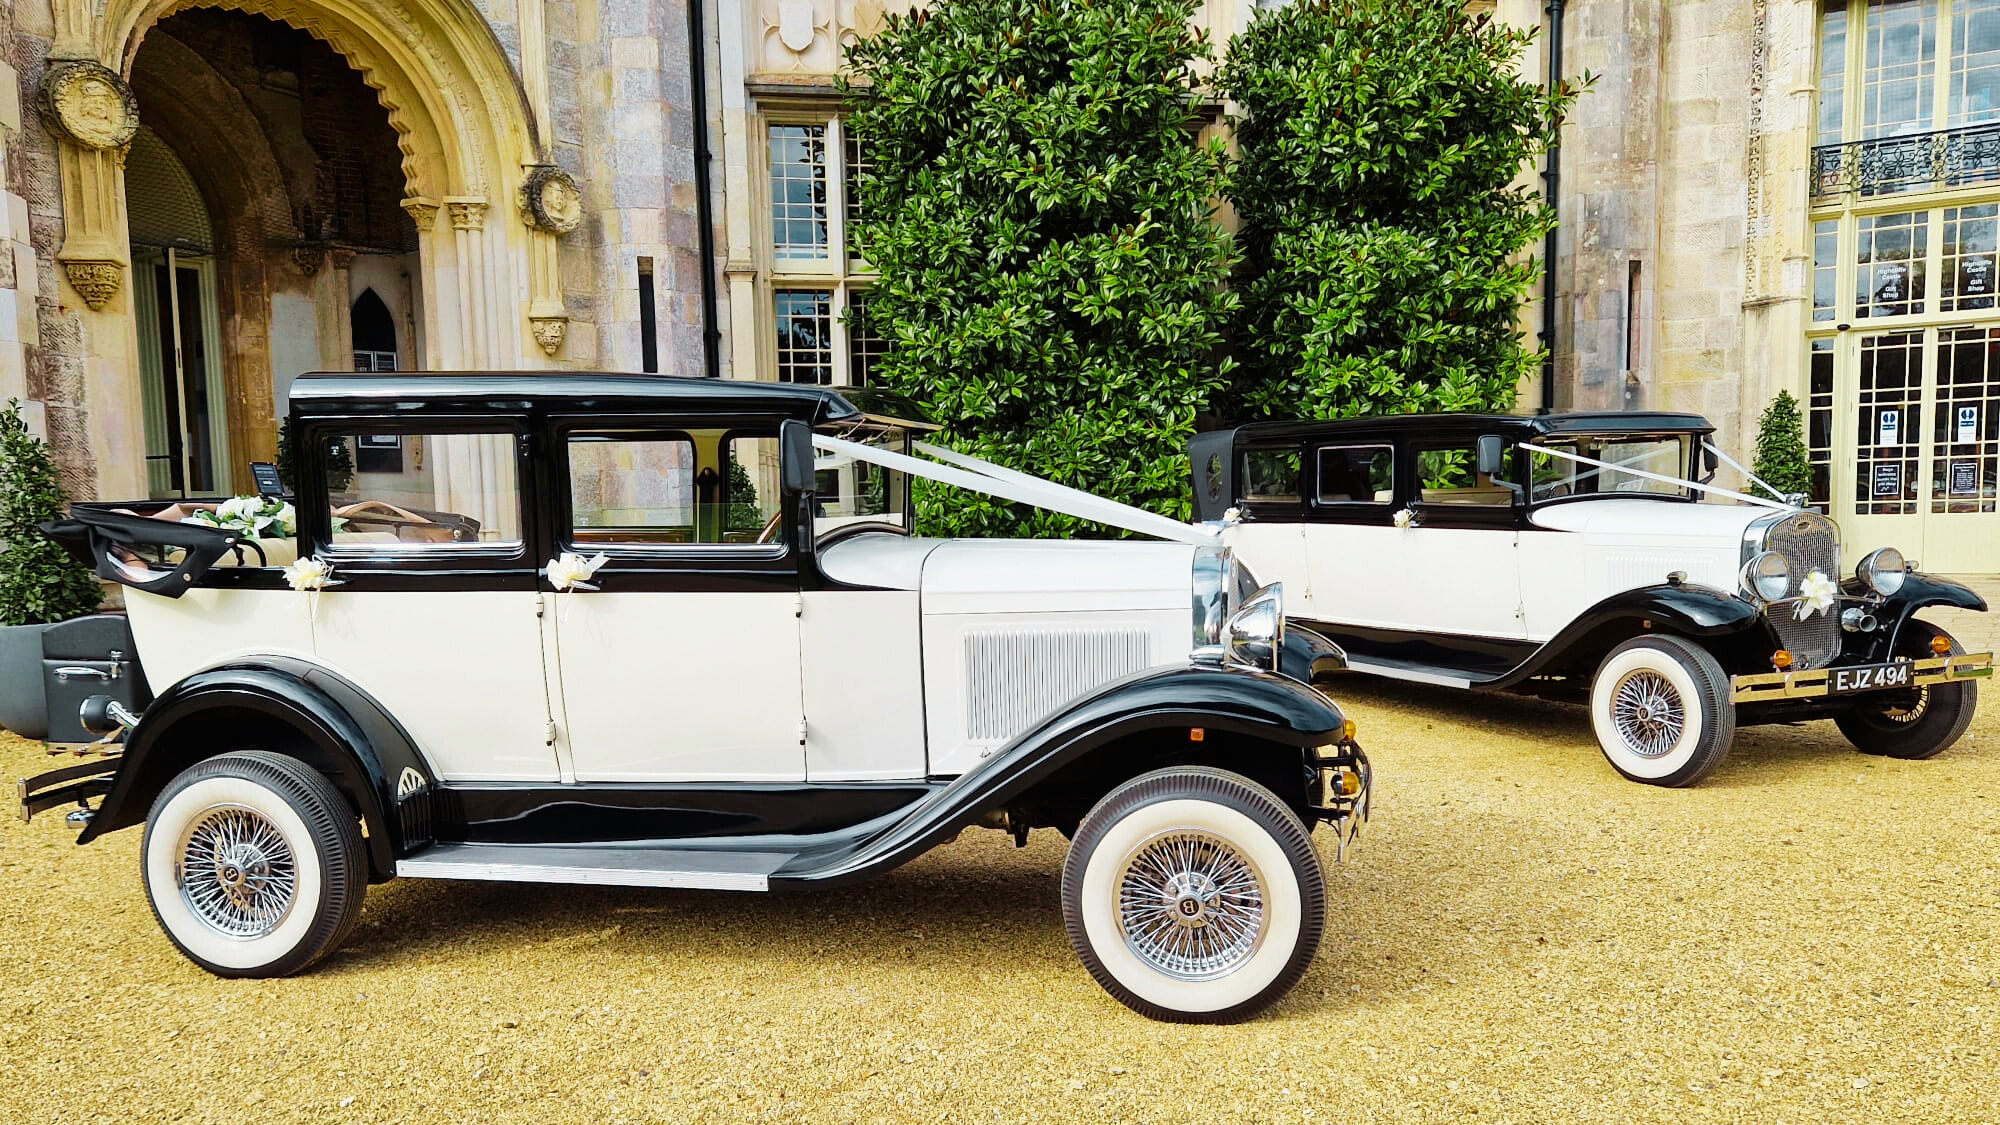 Two matching vintage wedding cars decorated with matching white ribbons. Vehicles are parked at the front entrance of a local wedding venue in Tolpuddle.